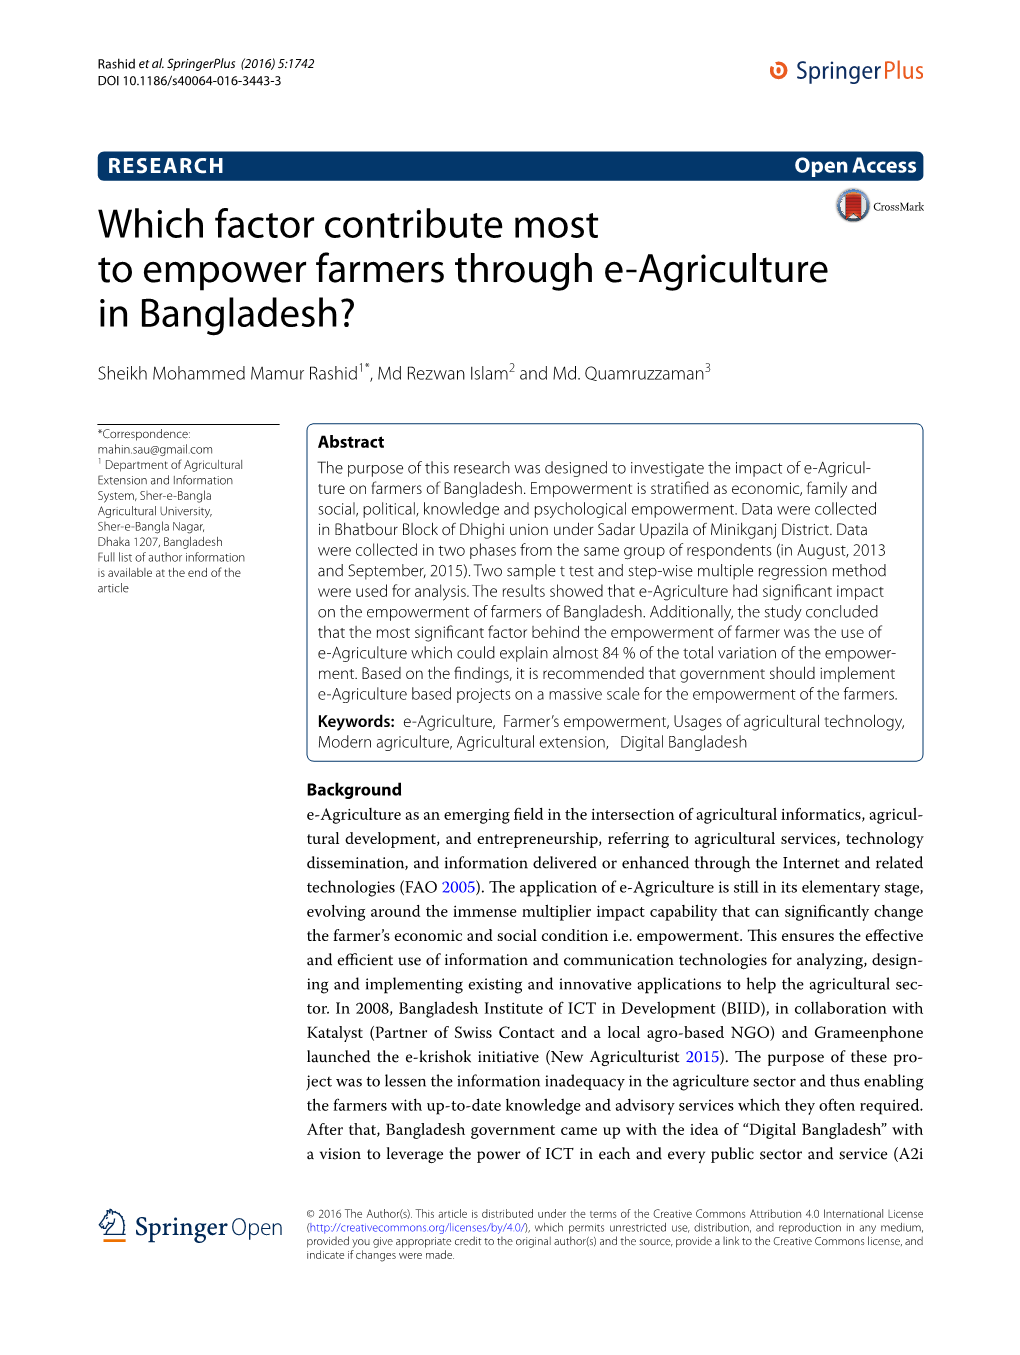 Which Factor Contribute Most to Empower Farmers Through E‑Agriculture in Bangladesh?